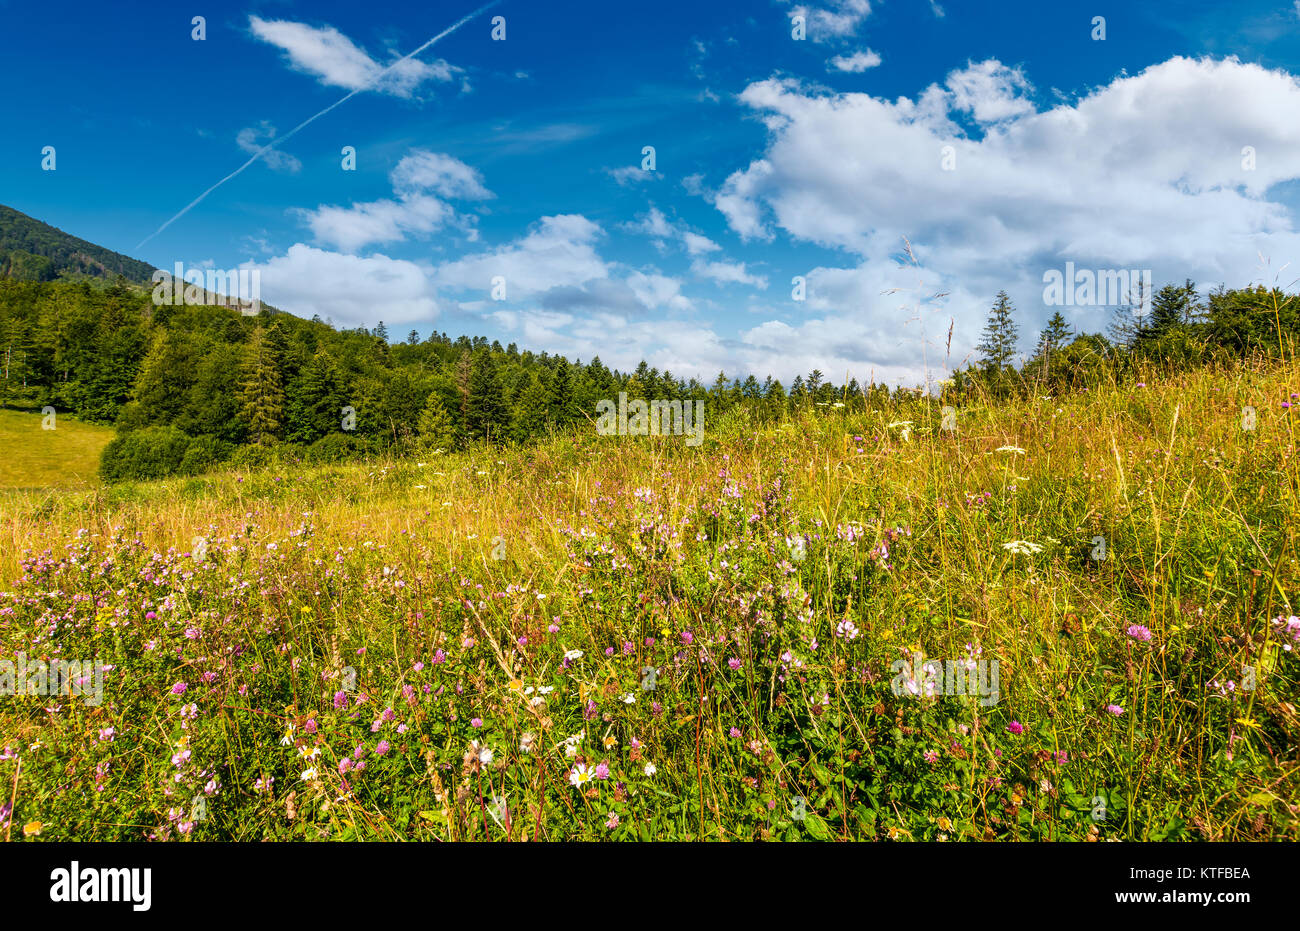 grassy meadow with wild herbs near the forest. beautiful nature summertime scenery in mountainous area Stock Photo